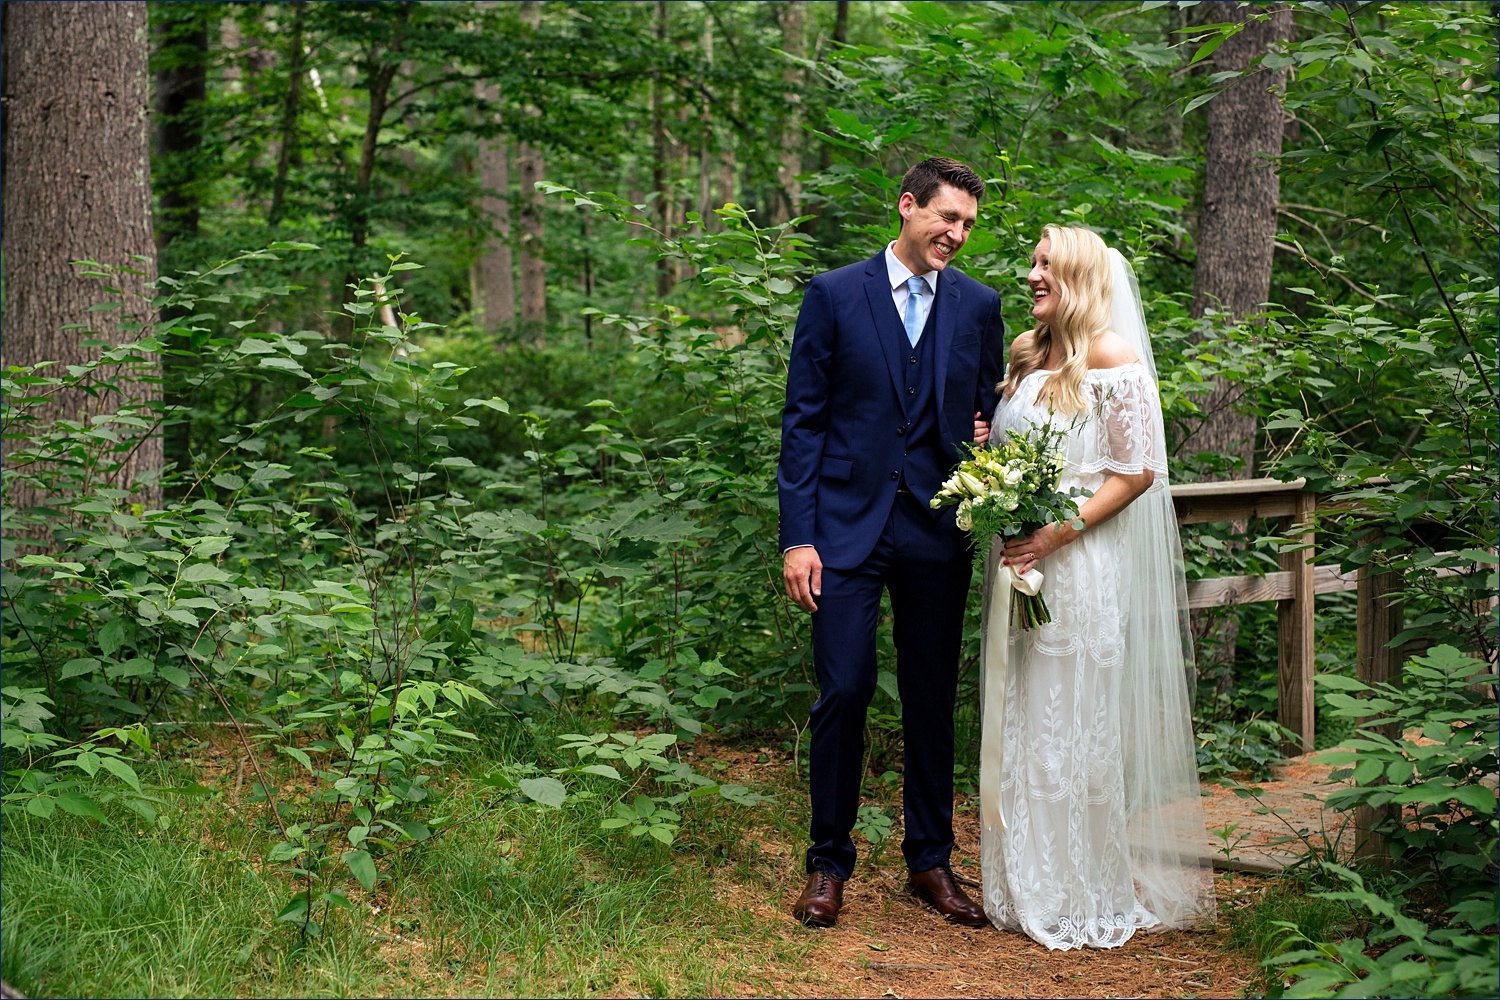 The bride and groom are all smiles on their New Hampshire wooded wedding day in Windham